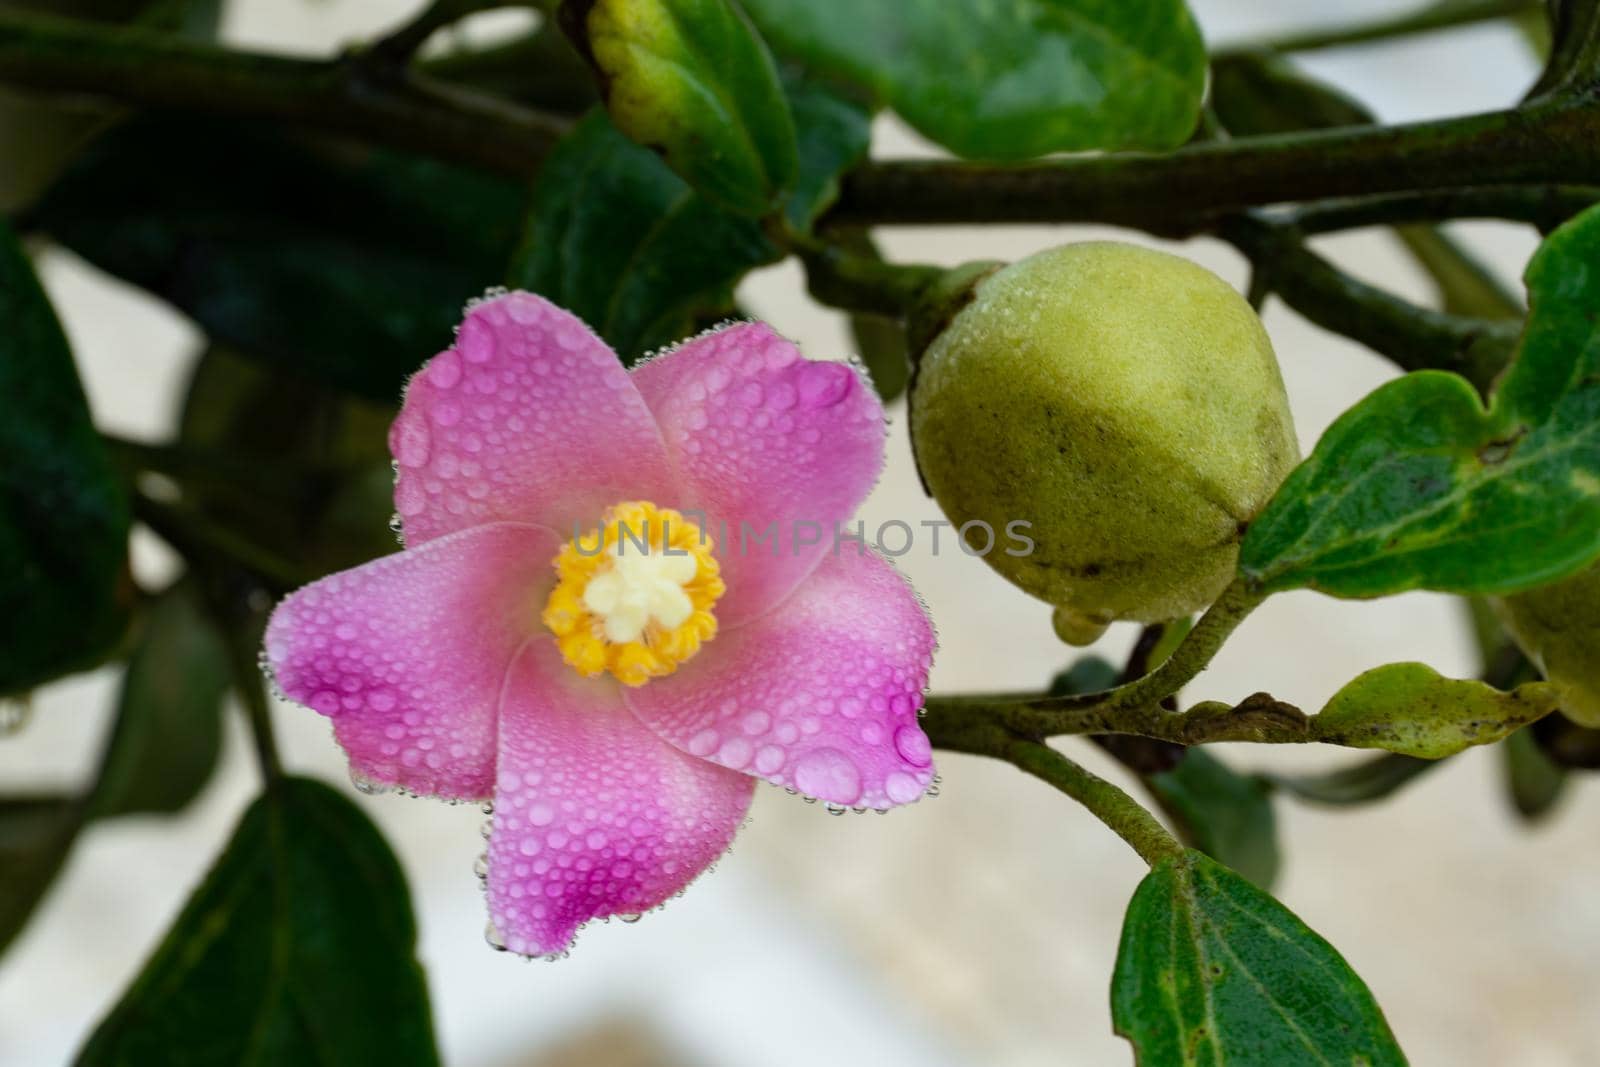 Gently pink lagunaria flower with water droplets on petals after rain close up